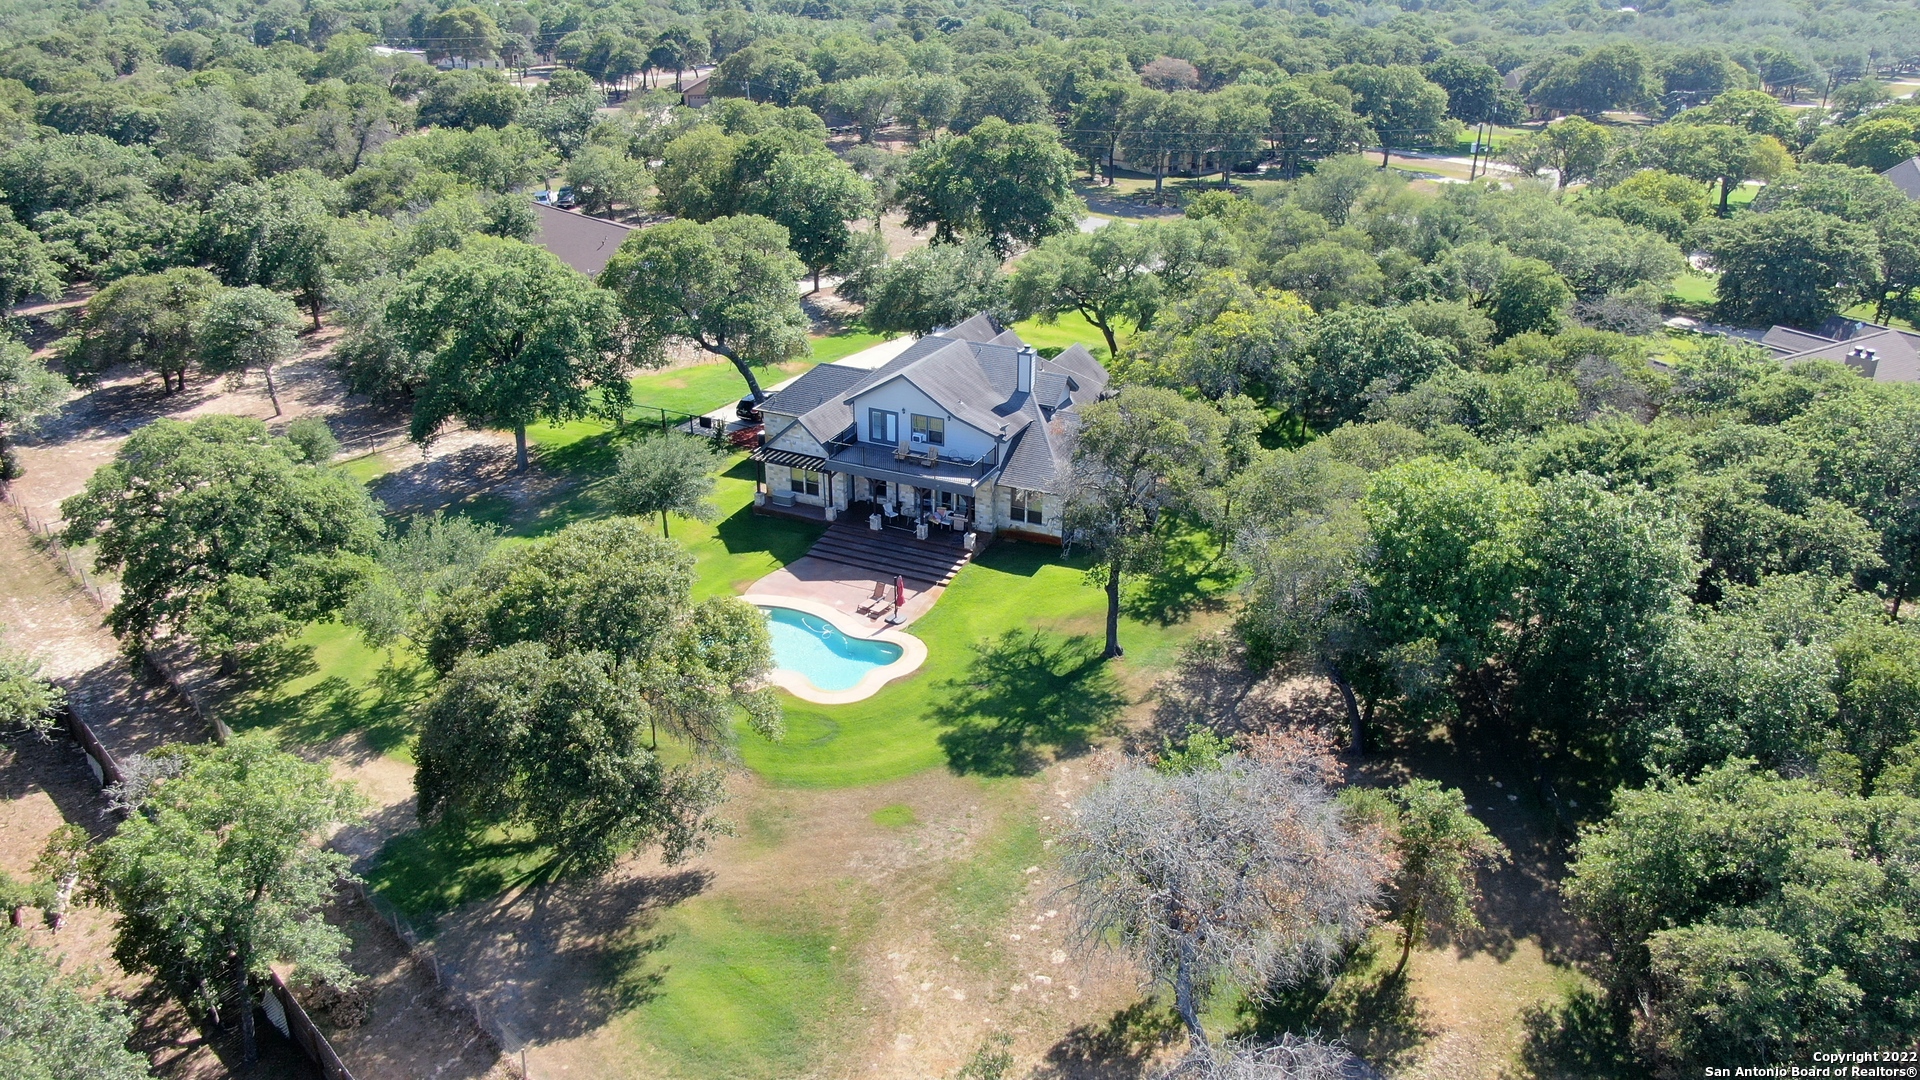 Located in Legacy Ranch Subd,No Hoa dues or City taxes,Low 2% Tax rate in the Sought after La Vernia ISD,Wilson County  *Very Clean* 1-Owner 4077SF Custom Built 1.5 Story 4-Side Rock Hm on a Fully Landscaped 1.4 Acre lot w/ a Cody Blt Ingrd Pool w/Spa (250 gal buried propane tank for pool/spa heater & cooktop in kitchen) Approx $30k Water Well for Front & Back Yard Sprinkler System/Landscaping (Water meter from SS Water Co for House) Fully Fenced Backyard,47x11 Covered Patio that Overlooks THE Pool,38x22 Finished Out Side Entry 3-Car Garage w/insulated doors *DOWNSTAIRS* has an 20x18 Master Bd AND 2 Or 3 More Bedrooms or Study w/Walk in Closet & French Doors,Spacious Island Kit w/Xtra Tall Custom Cabinets,GAS Cooktop,Blt in Oven & Microwave,Butlers Pantry,B'Fast Nook AND Formal Dining Rm or 2nd Living area *UPSTAIRS* via the Deco Wrought Iron Staircase is a Bathroom,20x8 Closet/Storage Rm,32x22 Gameroom OR Bedroom w/Outside Access to the 30x12 Balcony w/Tiled Flooring that Overlooks Pool/Backyard,HM has 2-Upgraded A/C Units,Sec Sys,2-Water Heaters,Transom Windows for Natural Lighting,French Doors,Rain Gutters,Lots of Crown Molding & Raised Deco Ceilings,Travertine Flooring,Water Softener,Pipe Fencing,GVEC Electric Services & FIBER OPTICS INTERNET,Again 1-Owner Very Clean Custon Blt Rock Hm that Shows like a MODEL HM